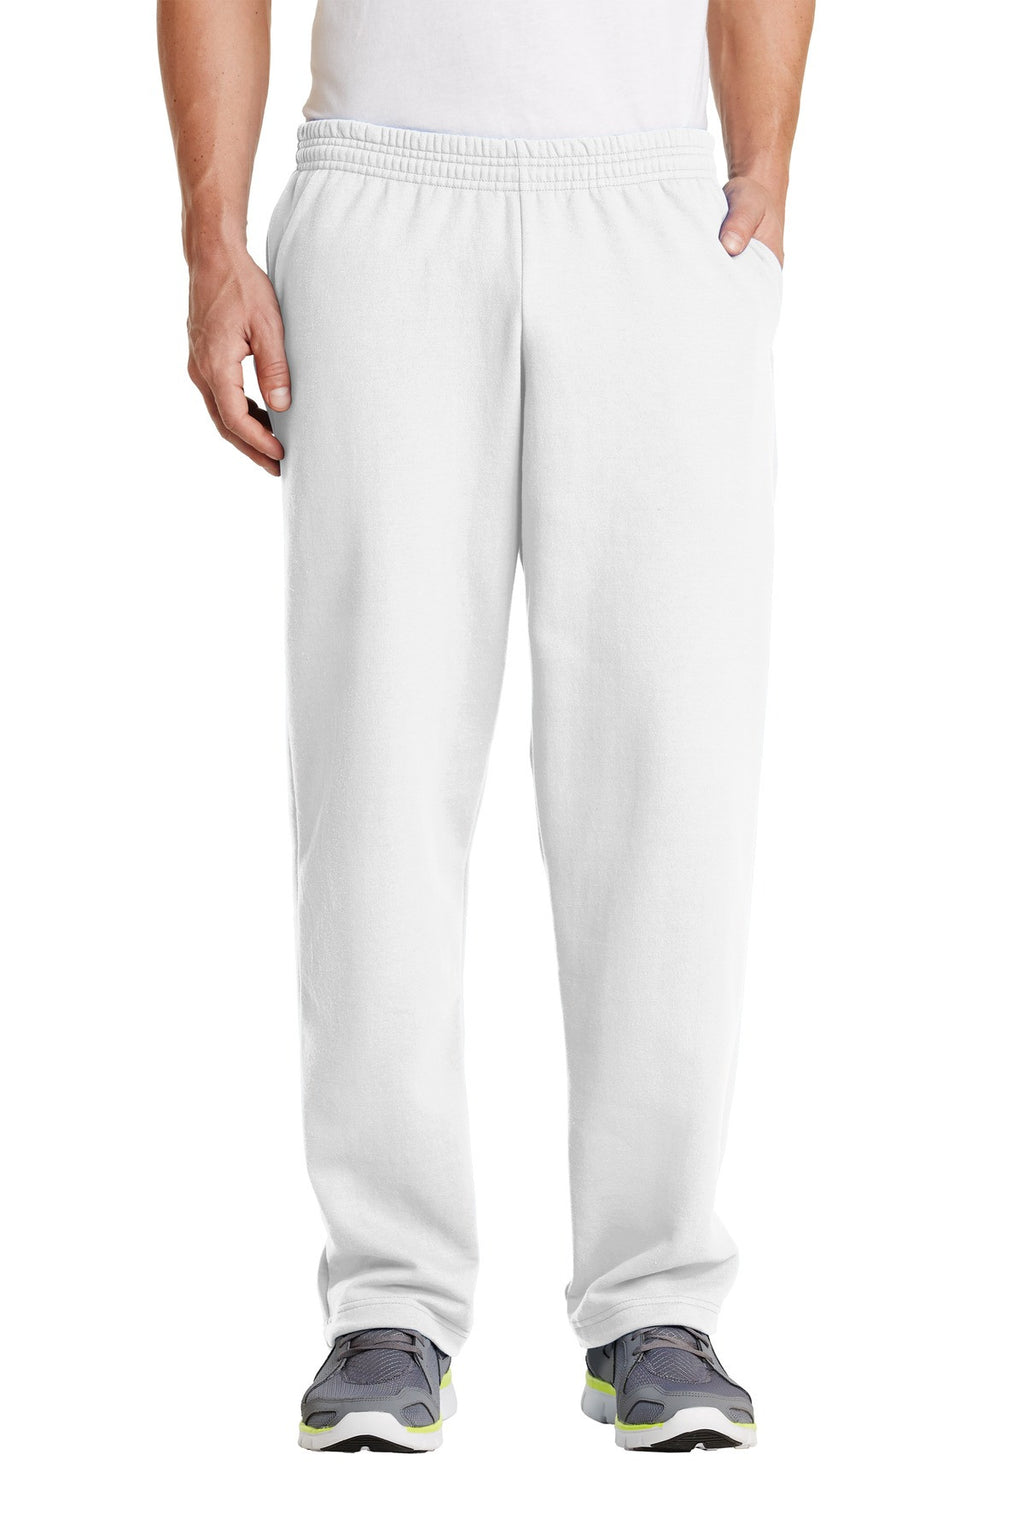 Port & Company Classic Open Bottom Sweatpant With Pockets-7